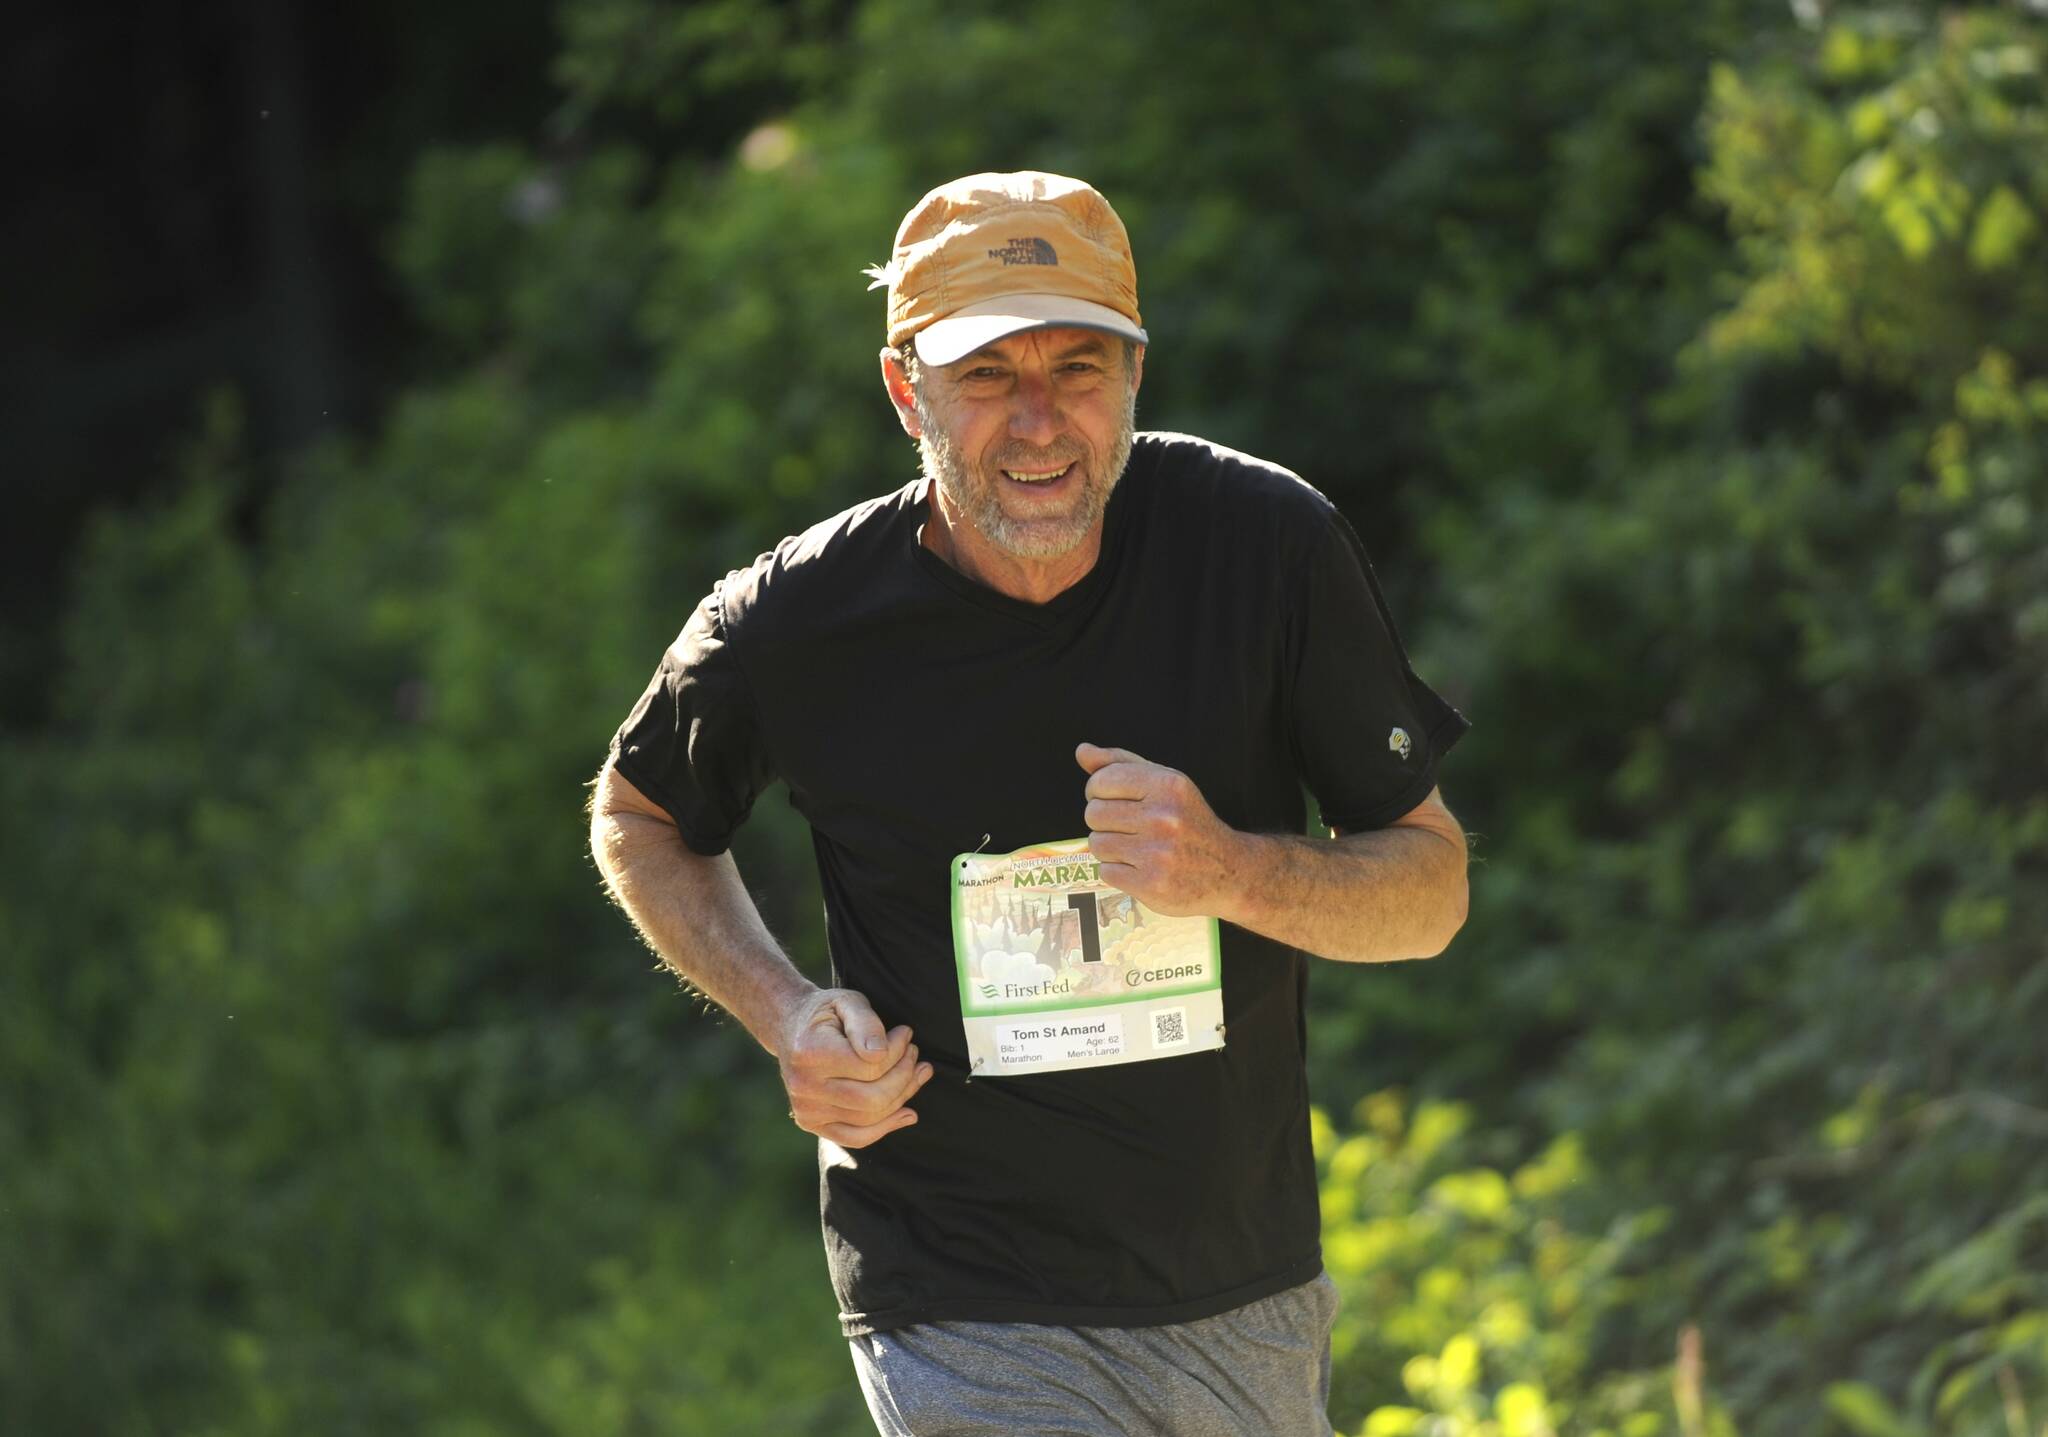 Sequim Gazette photo by Michael Dashiell / Tom St. Amand of Port Angeles grins as he makes his way up a hill at Whitefeather Way during the June 4 North Olympic Discovery Marathon.